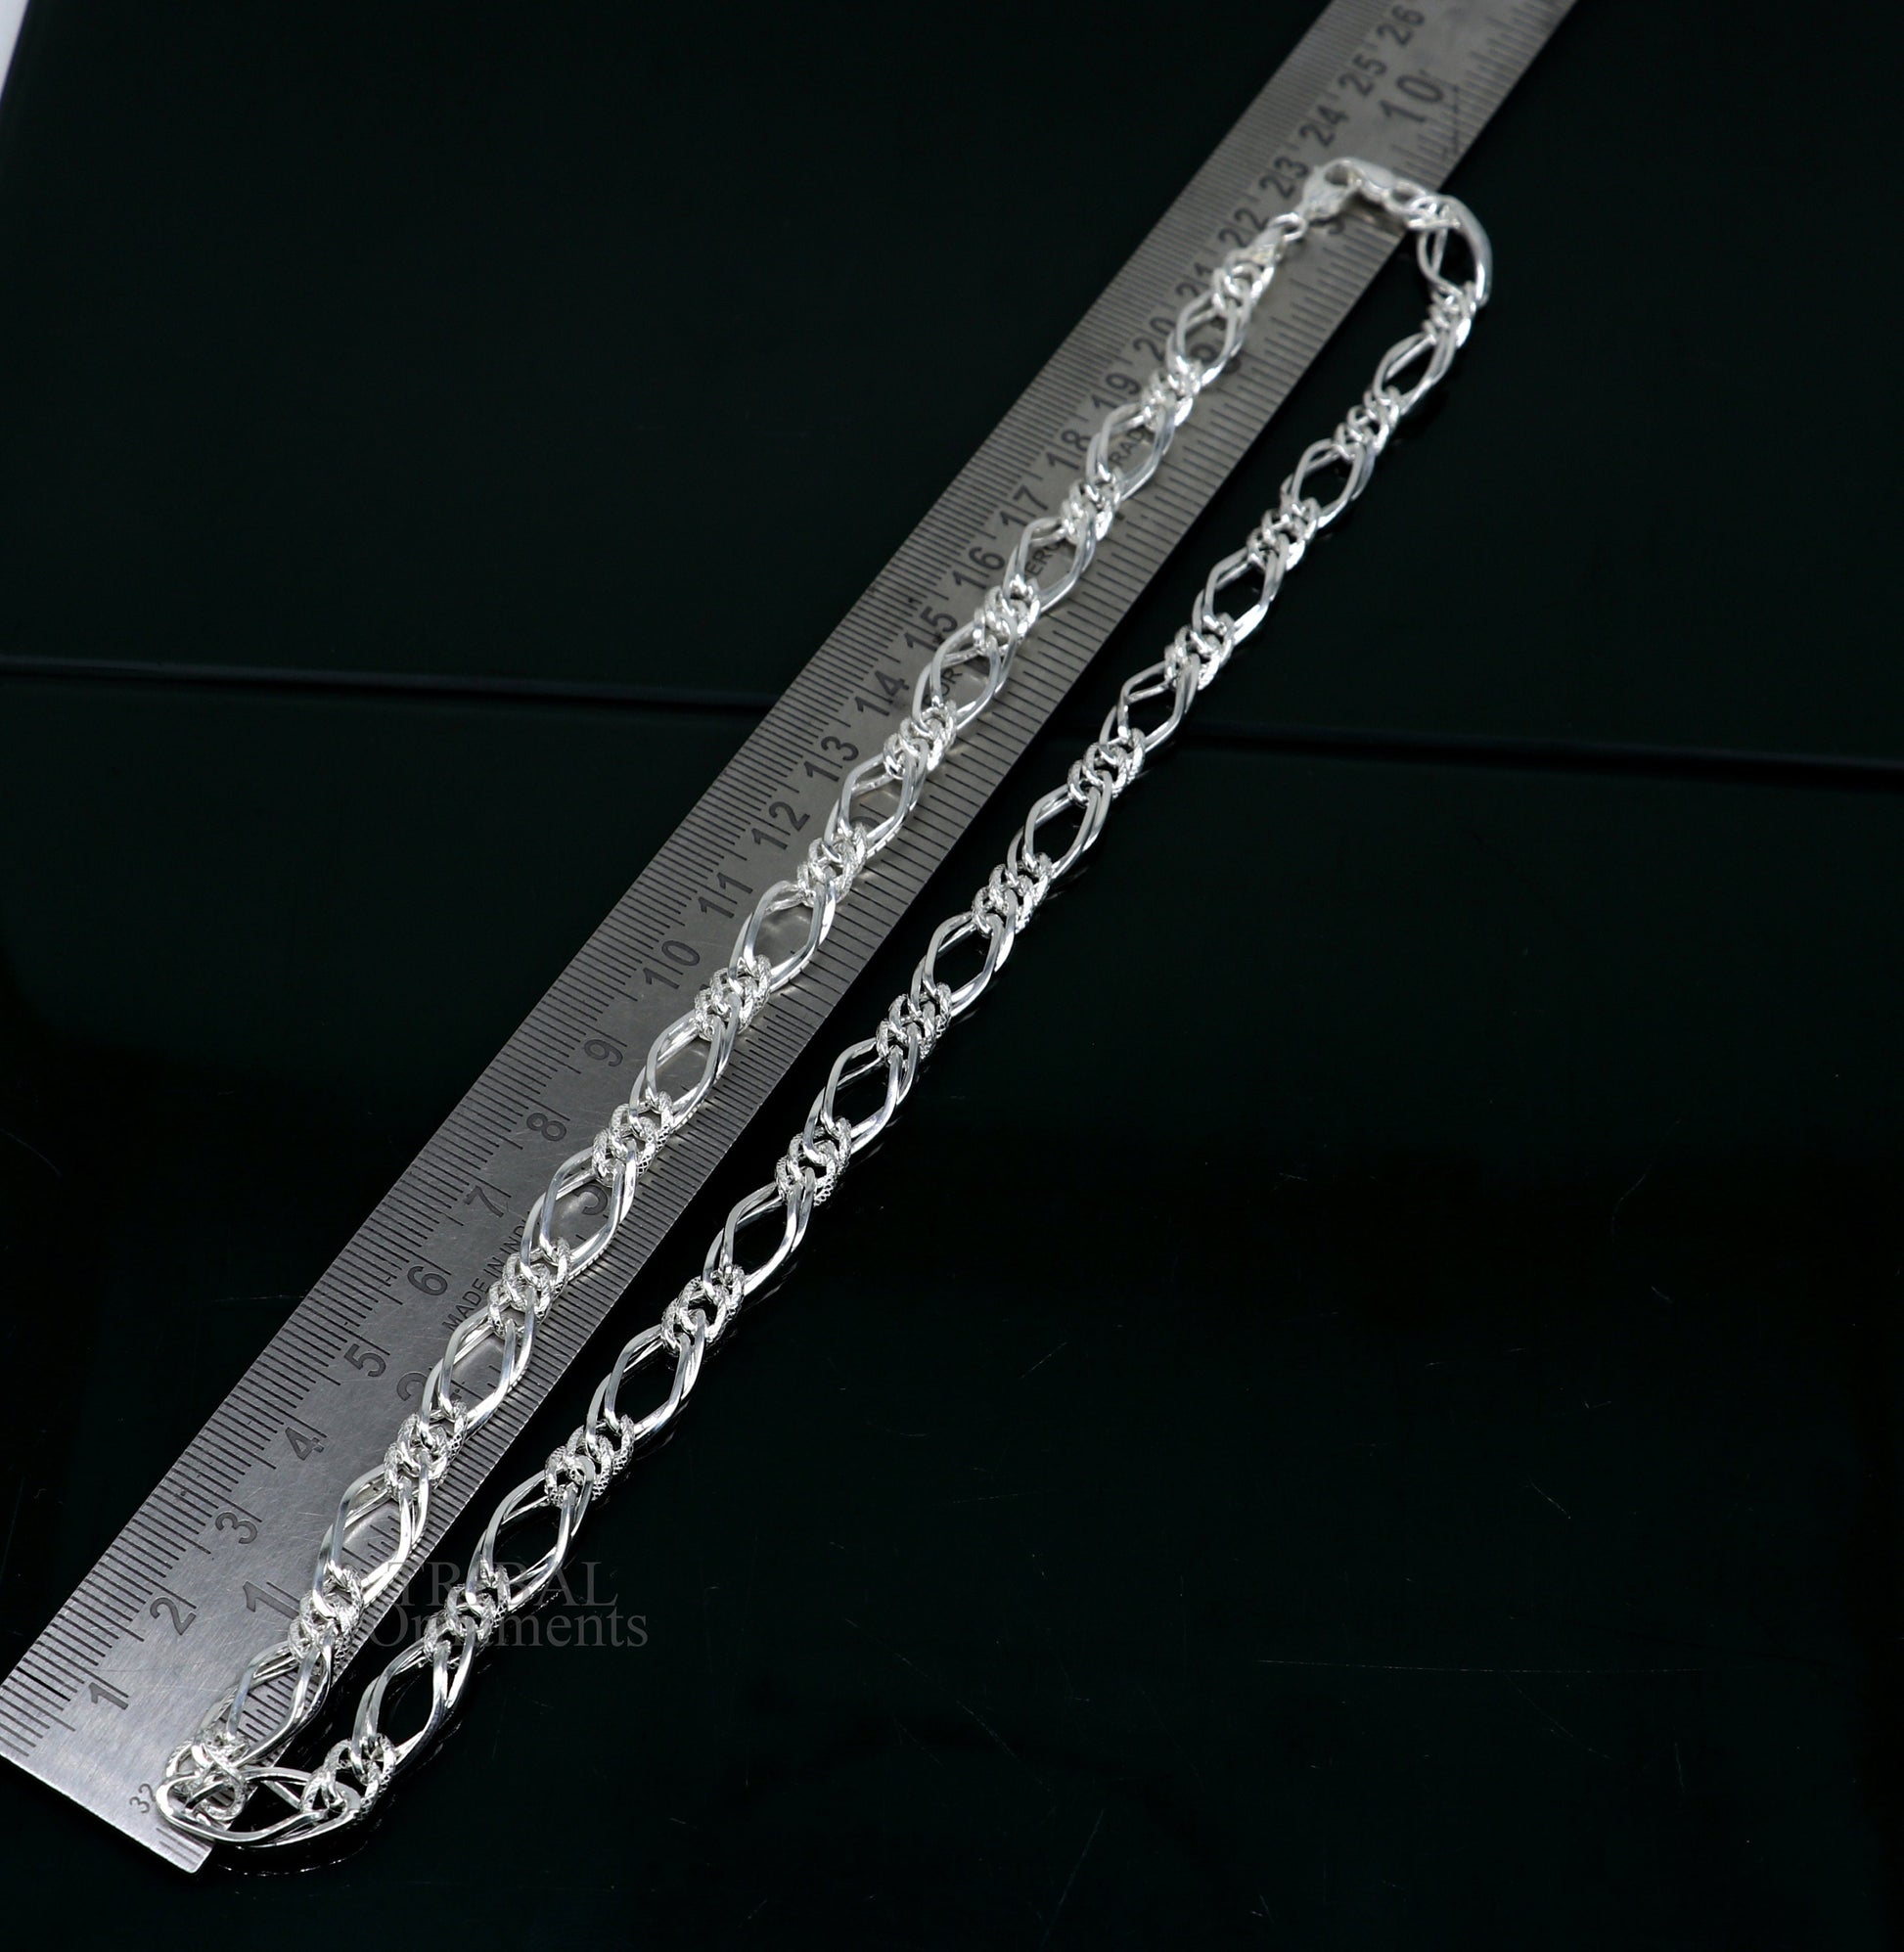 Amazing unique stylish 20" 925 sterling silver 6mm handmade amazing chain necklace excellent gifting jewelry, men's chain necklace nch341 - TRIBAL ORNAMENTS